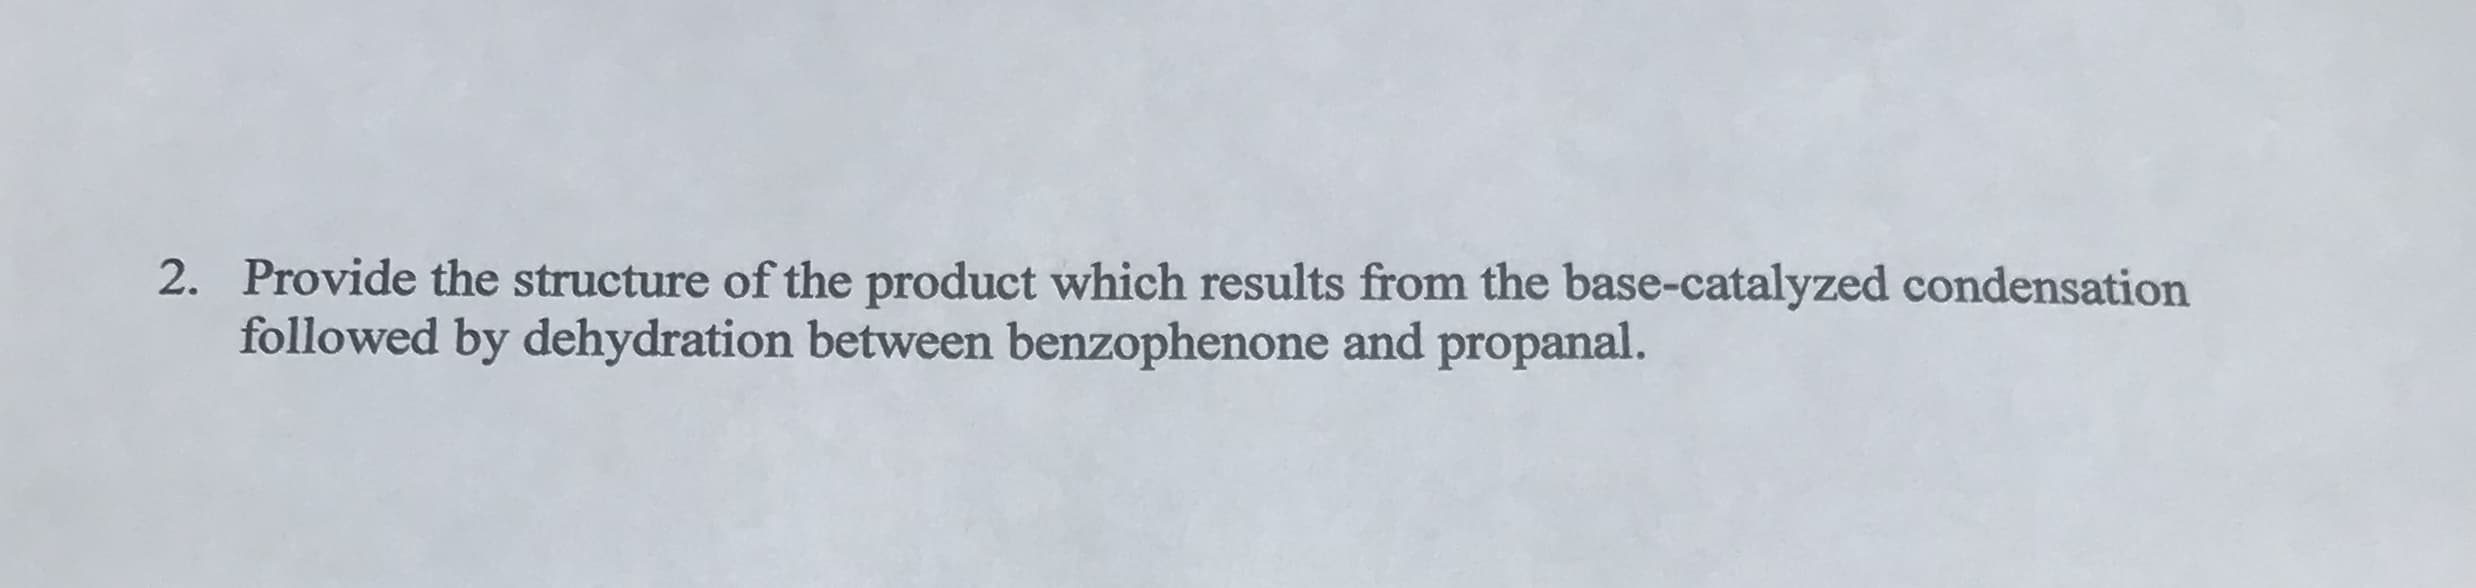 2. Provide the structure of the product which results from the base-catalyzed condensation
followed by dehydration between benzophenone and propanal.
